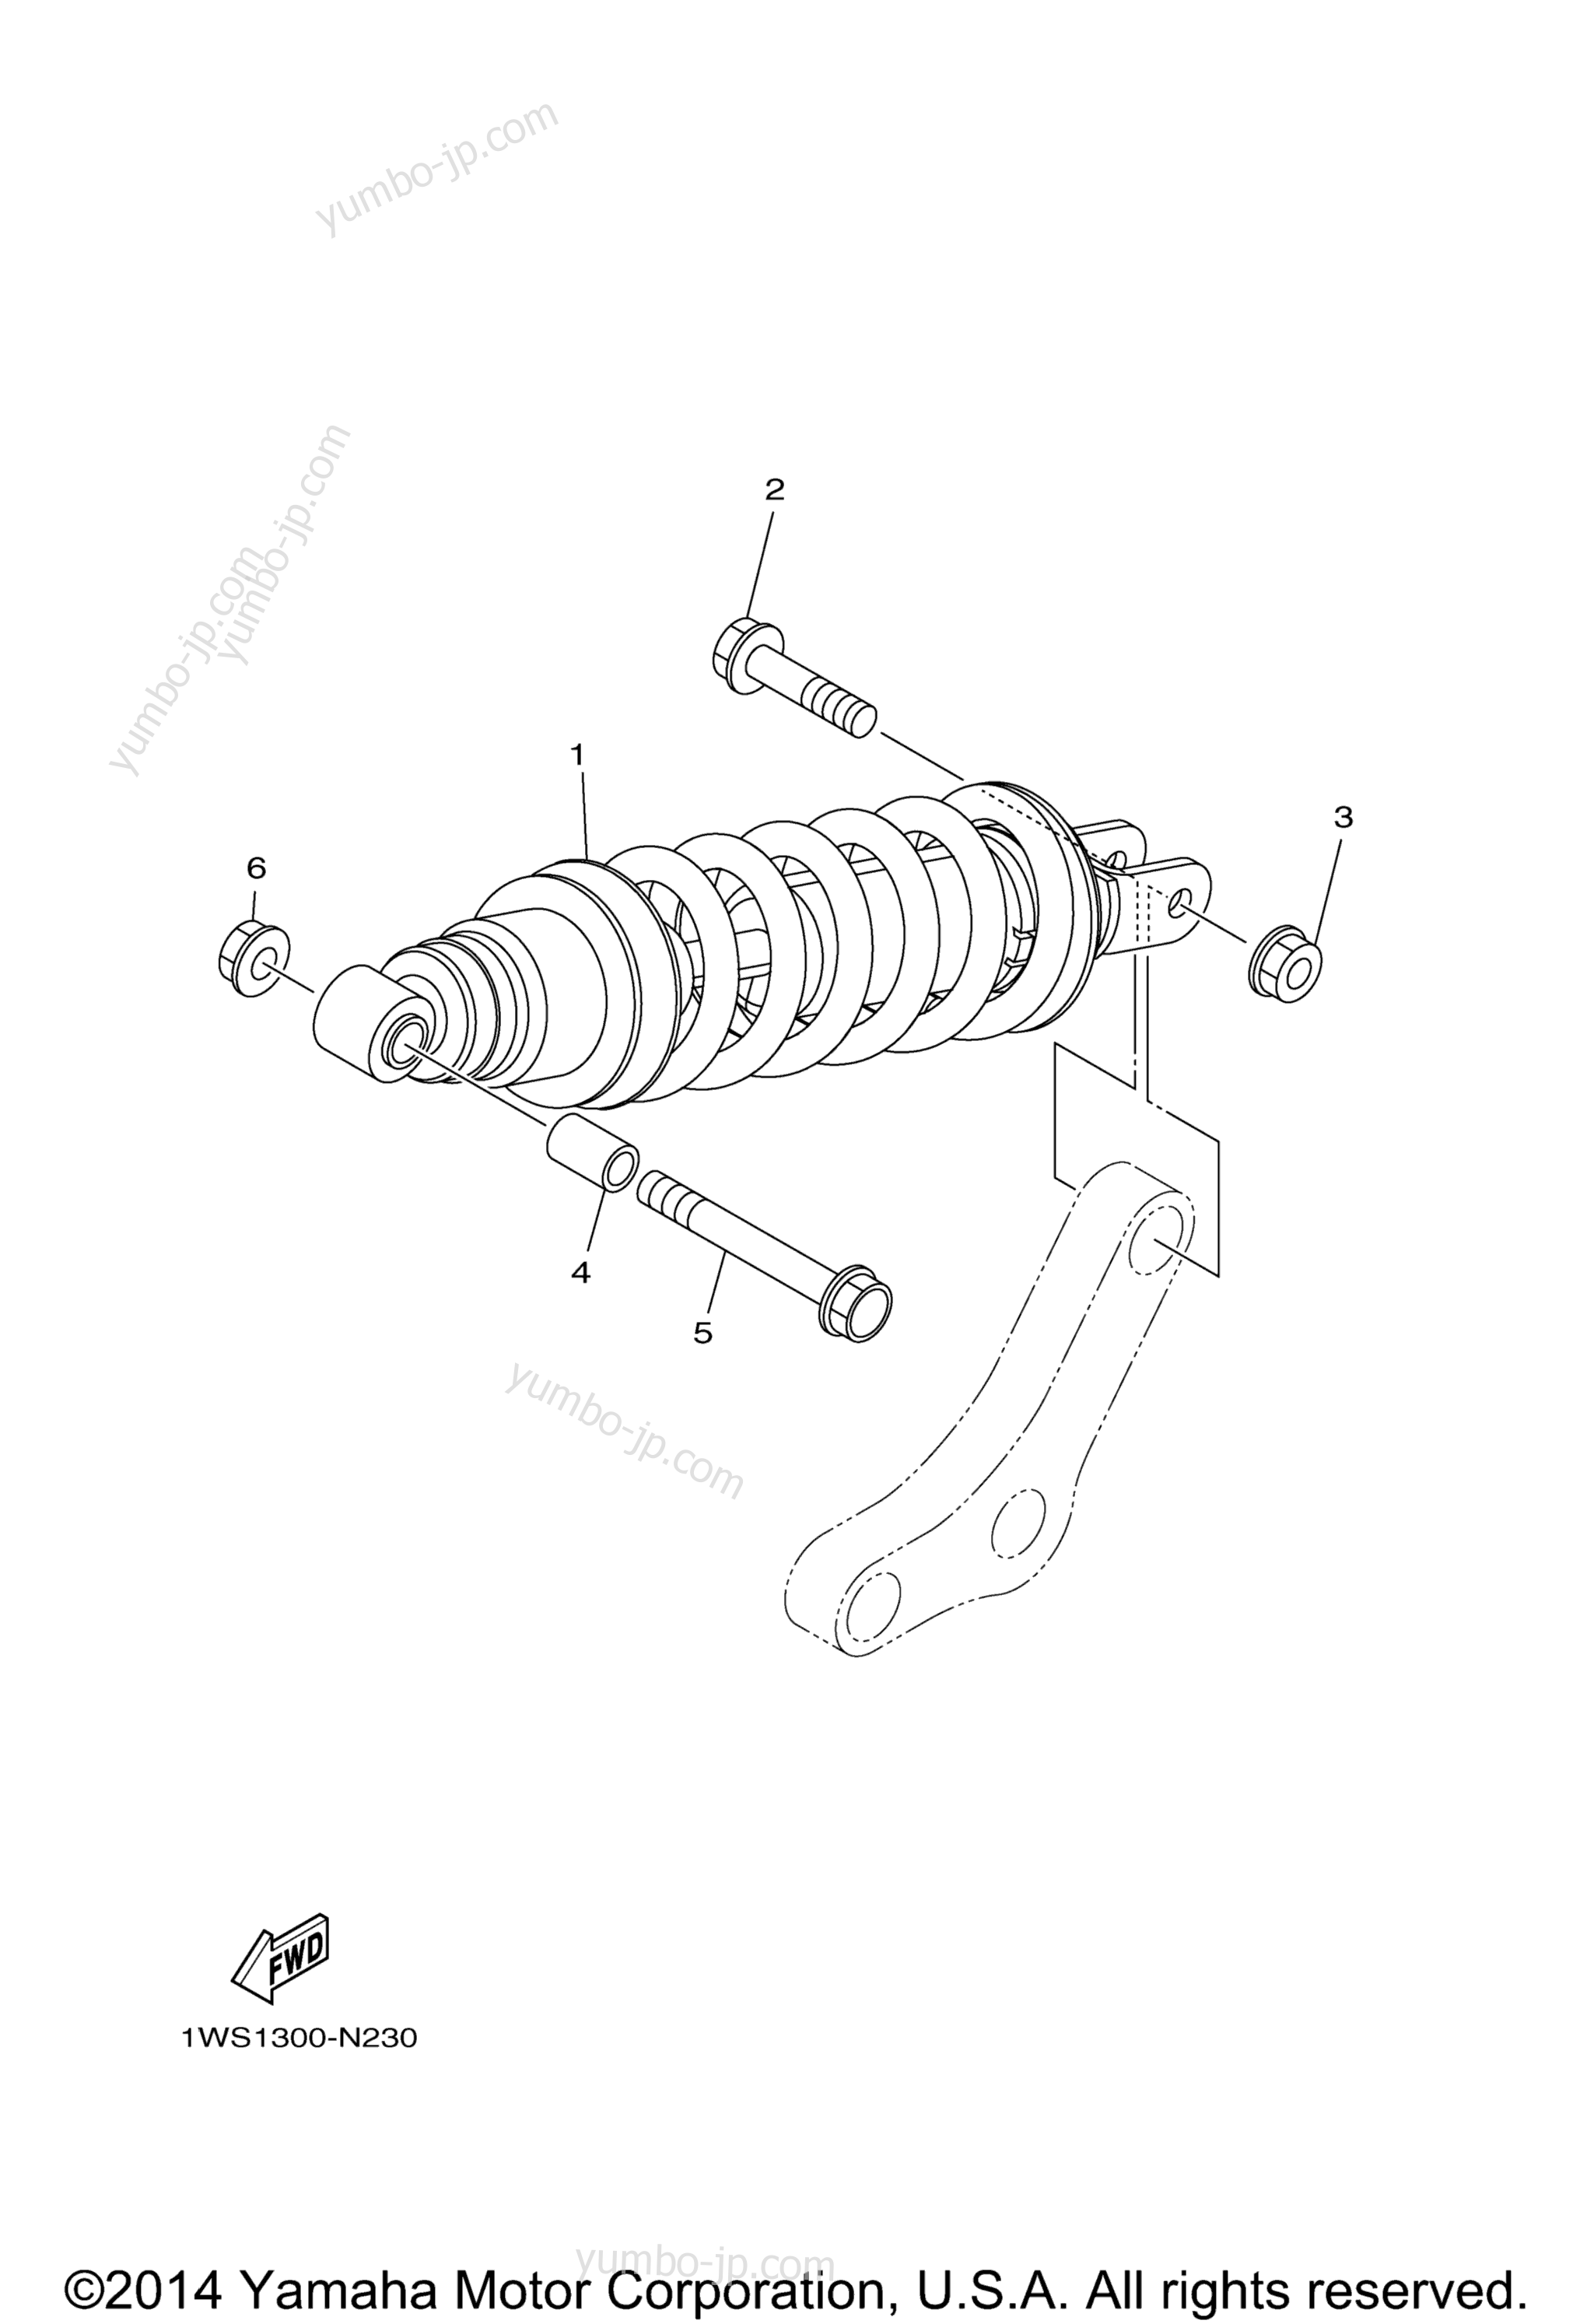 Rear Suspension for motorcycles YAMAHA FZ07 (FZ07FGY) 2015 year